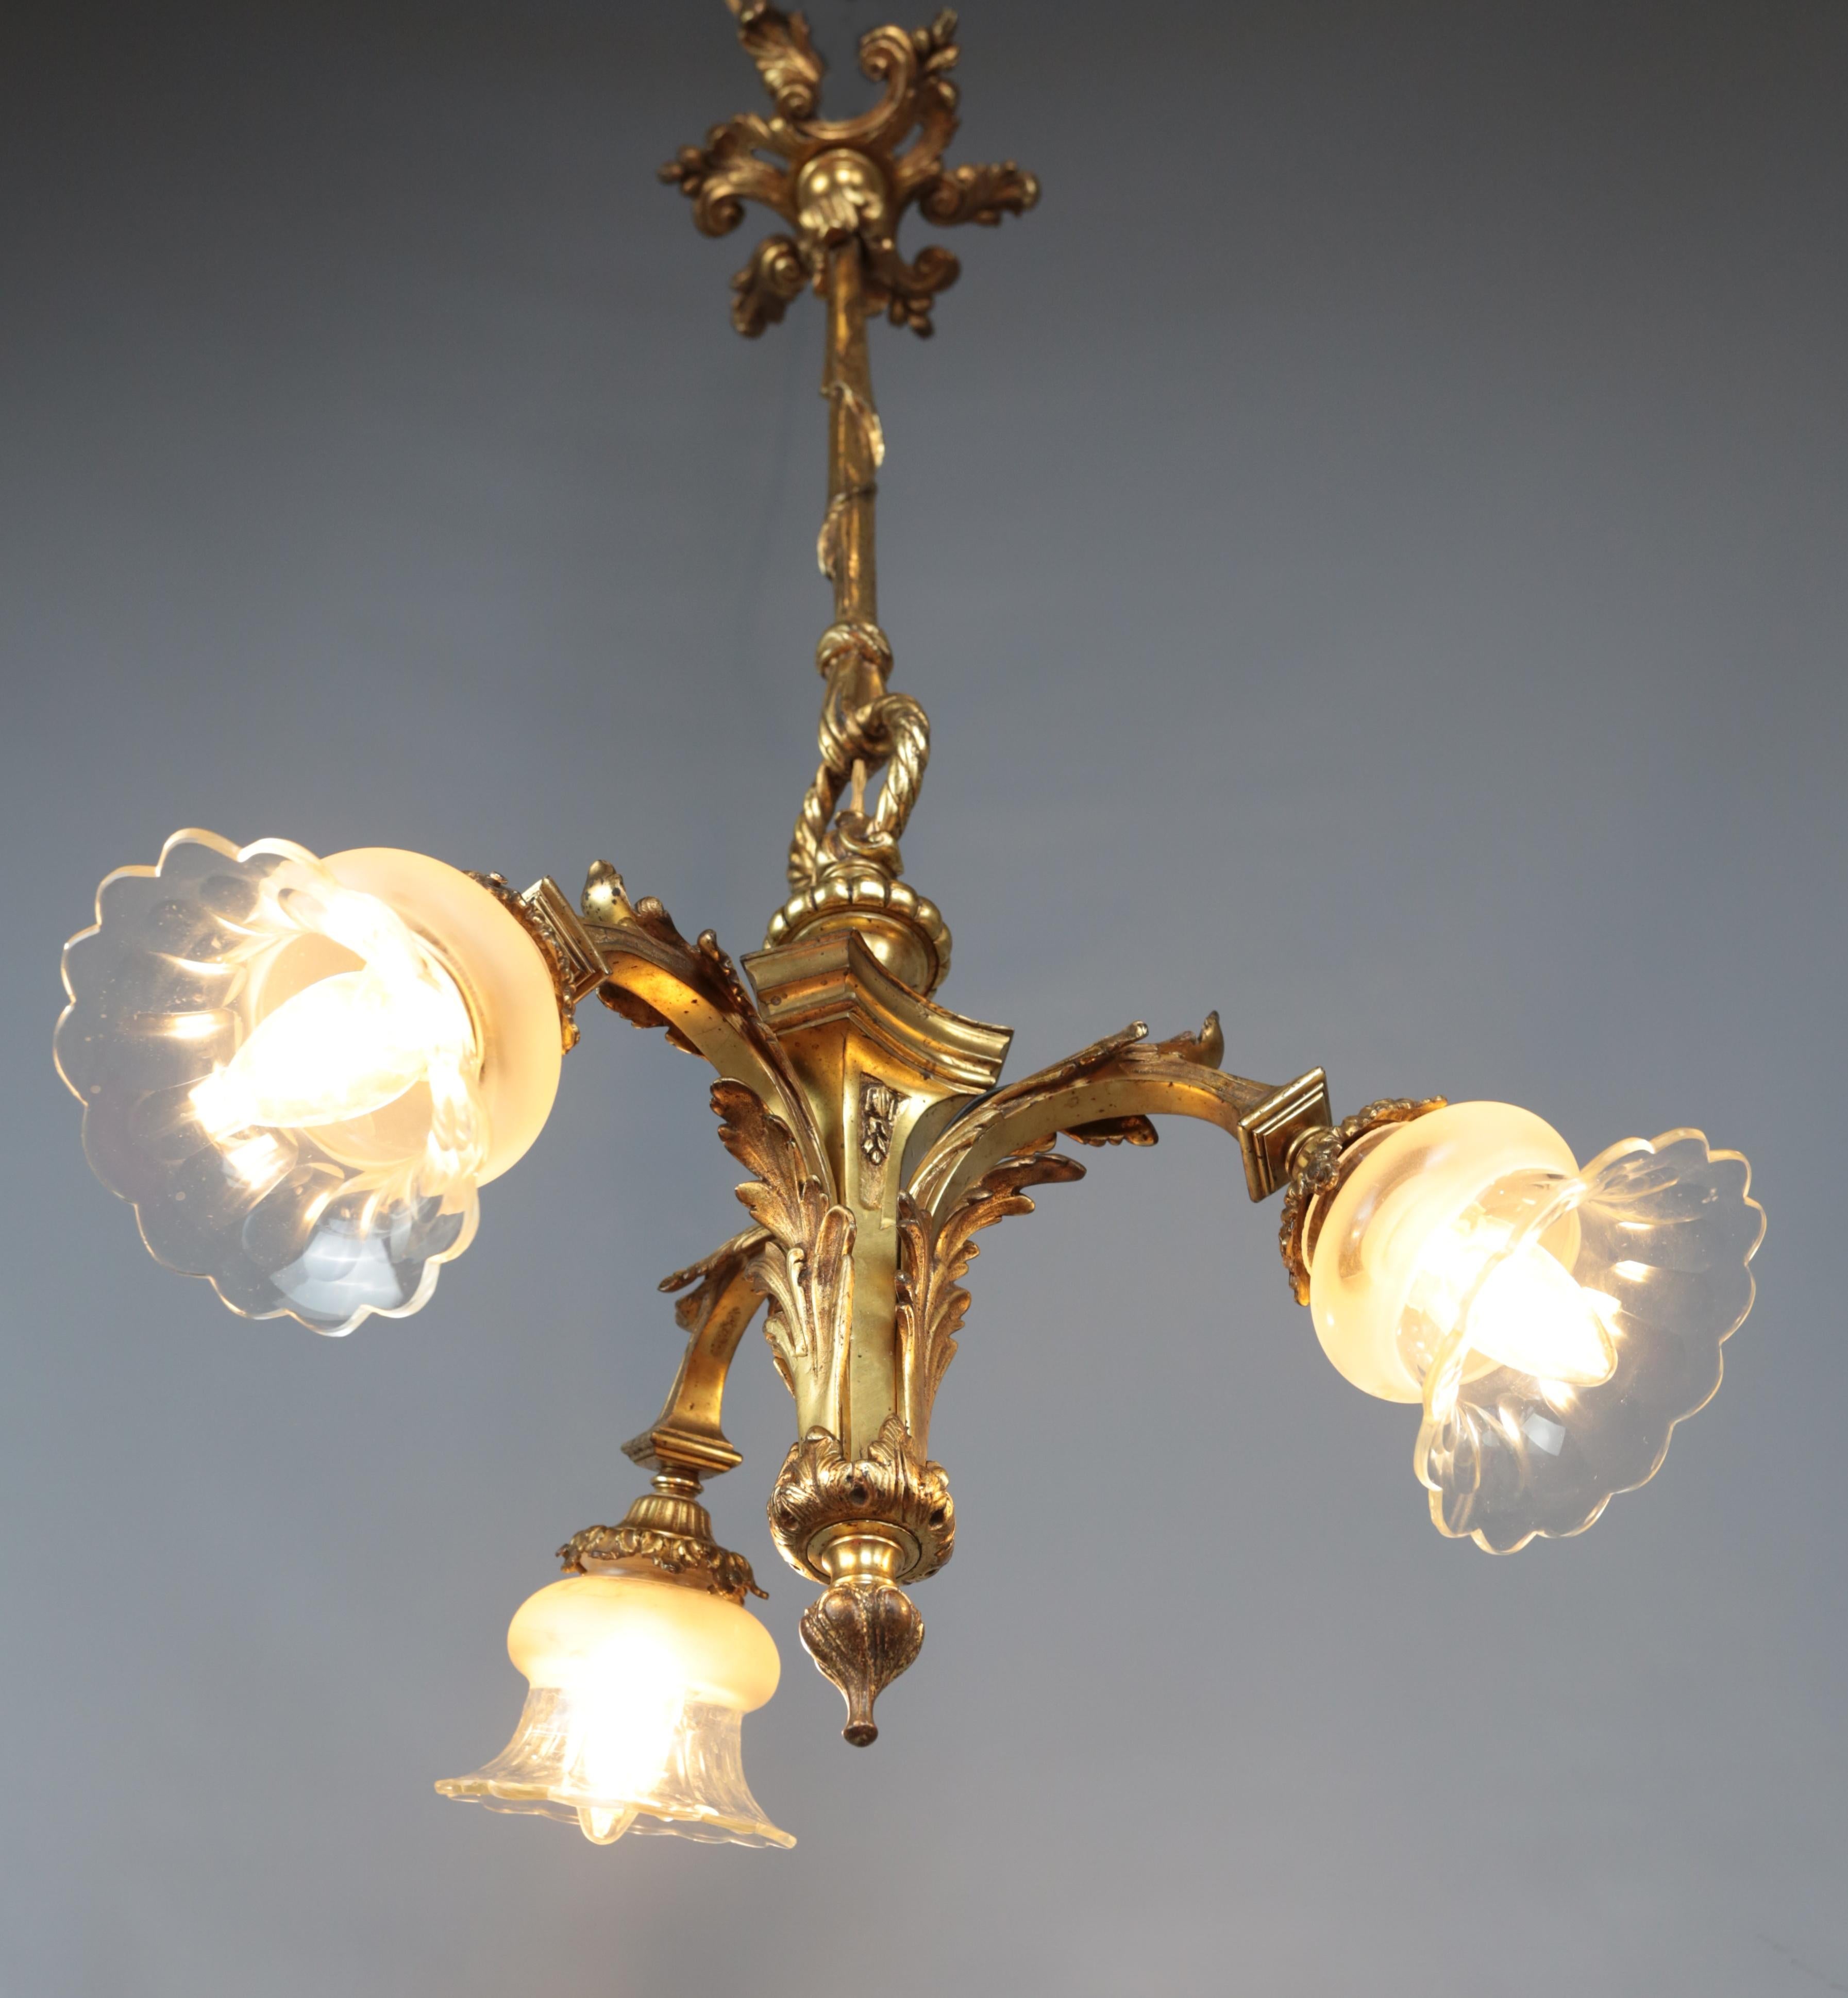 Small antique gilt bronze chandelier

A small chandelier of the Mazarin type in gilded bronze. The chandelier is very well cast. Shades are glass, partially etched glass. The chandelier is for three bulbs with a classic E27 thread up to 40W (normal,